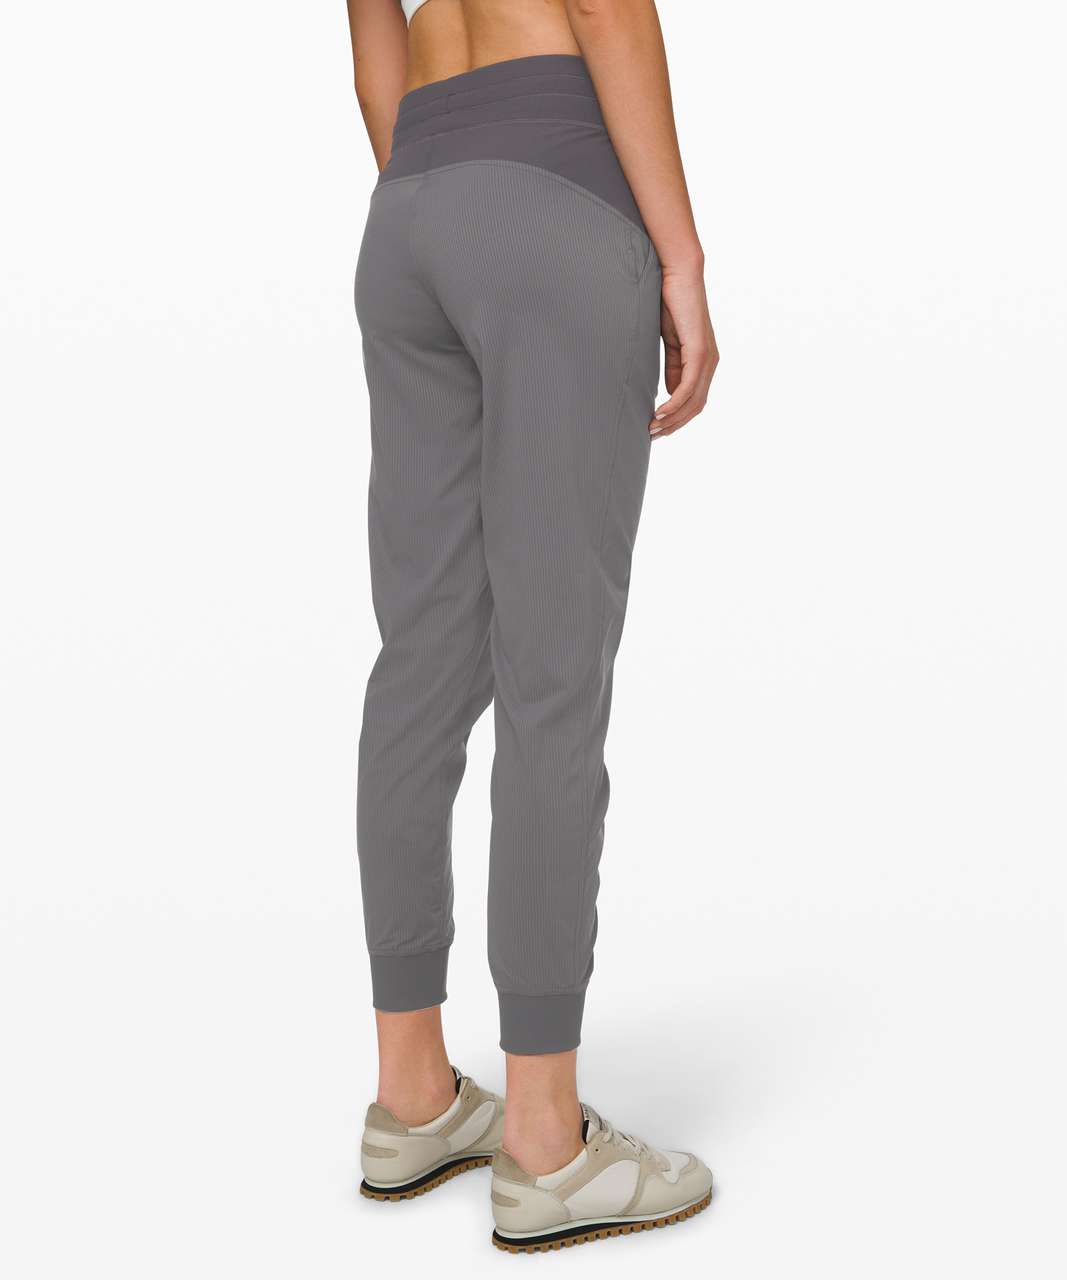 Lululemon Dance Studio Mid-Rise Jogger. Color: Rhino Grey. Size 6. New With  Tag.